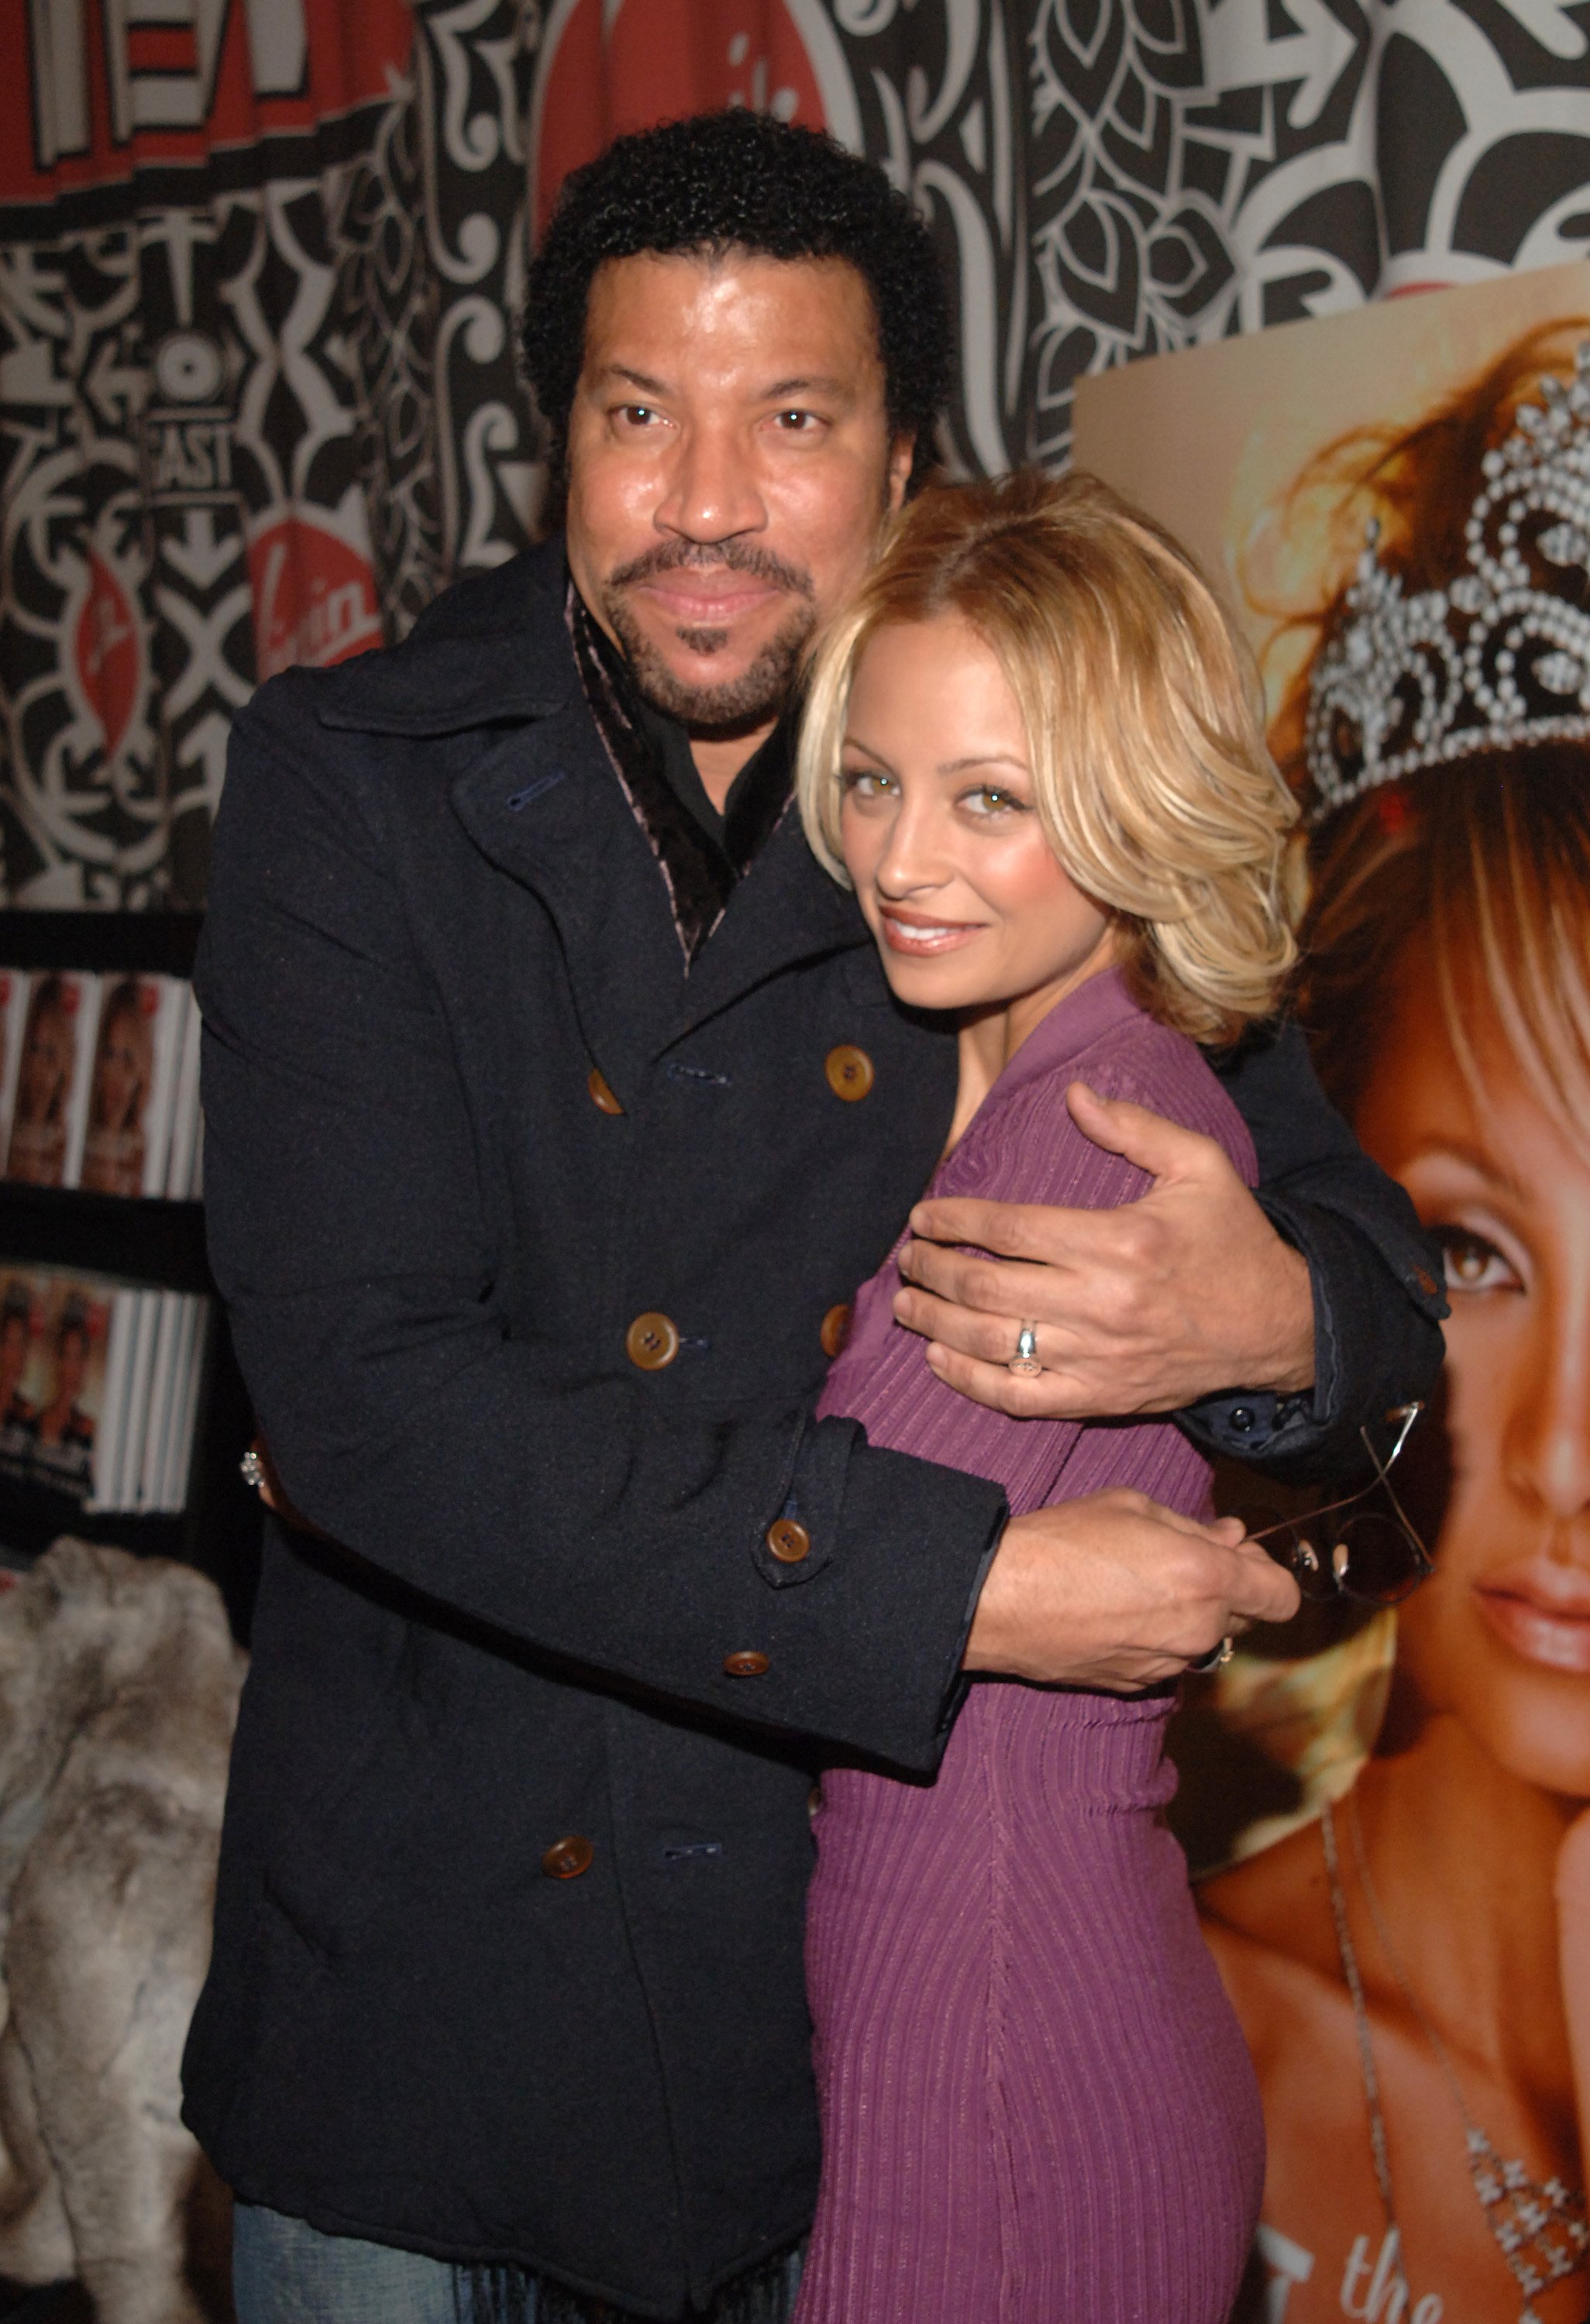 Lionel Richie and Nicole Richie share a moment at the "The Truth About Diamonds" book signing on November 10, 2005, in New York City. | Source: Getty Images.